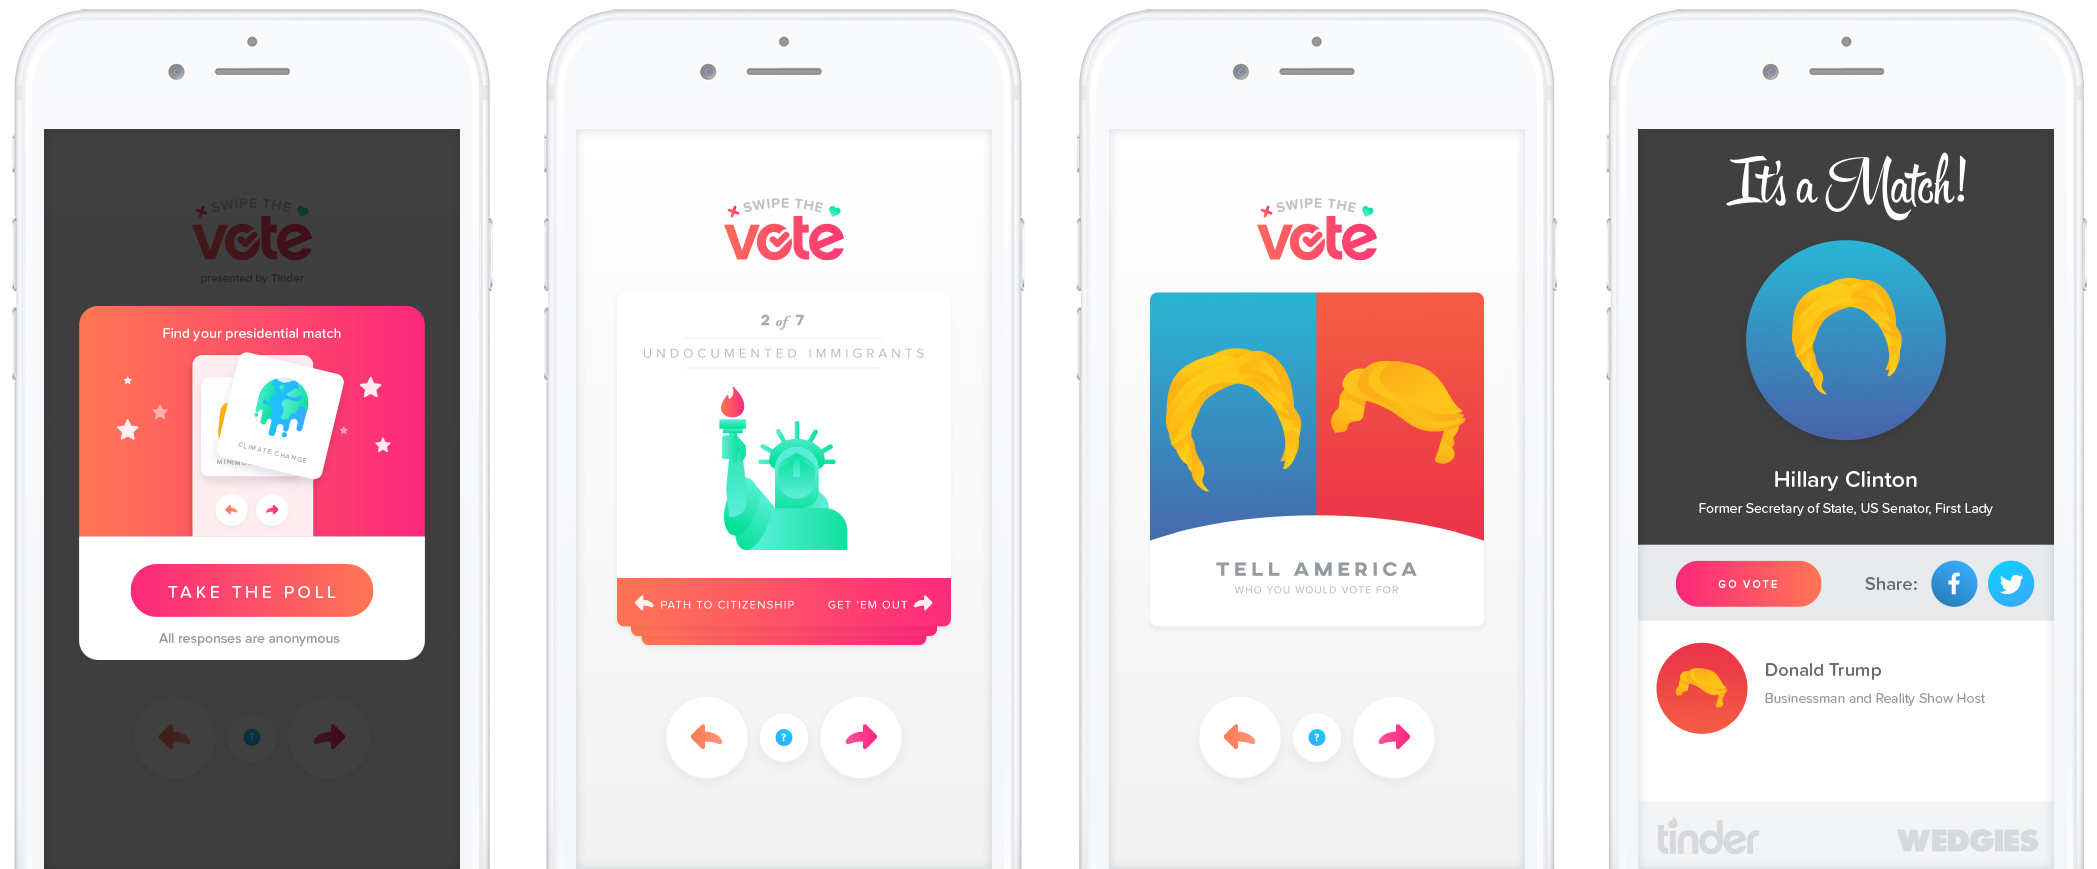 Tinder Asks Users to ‘Swipe the Vote’